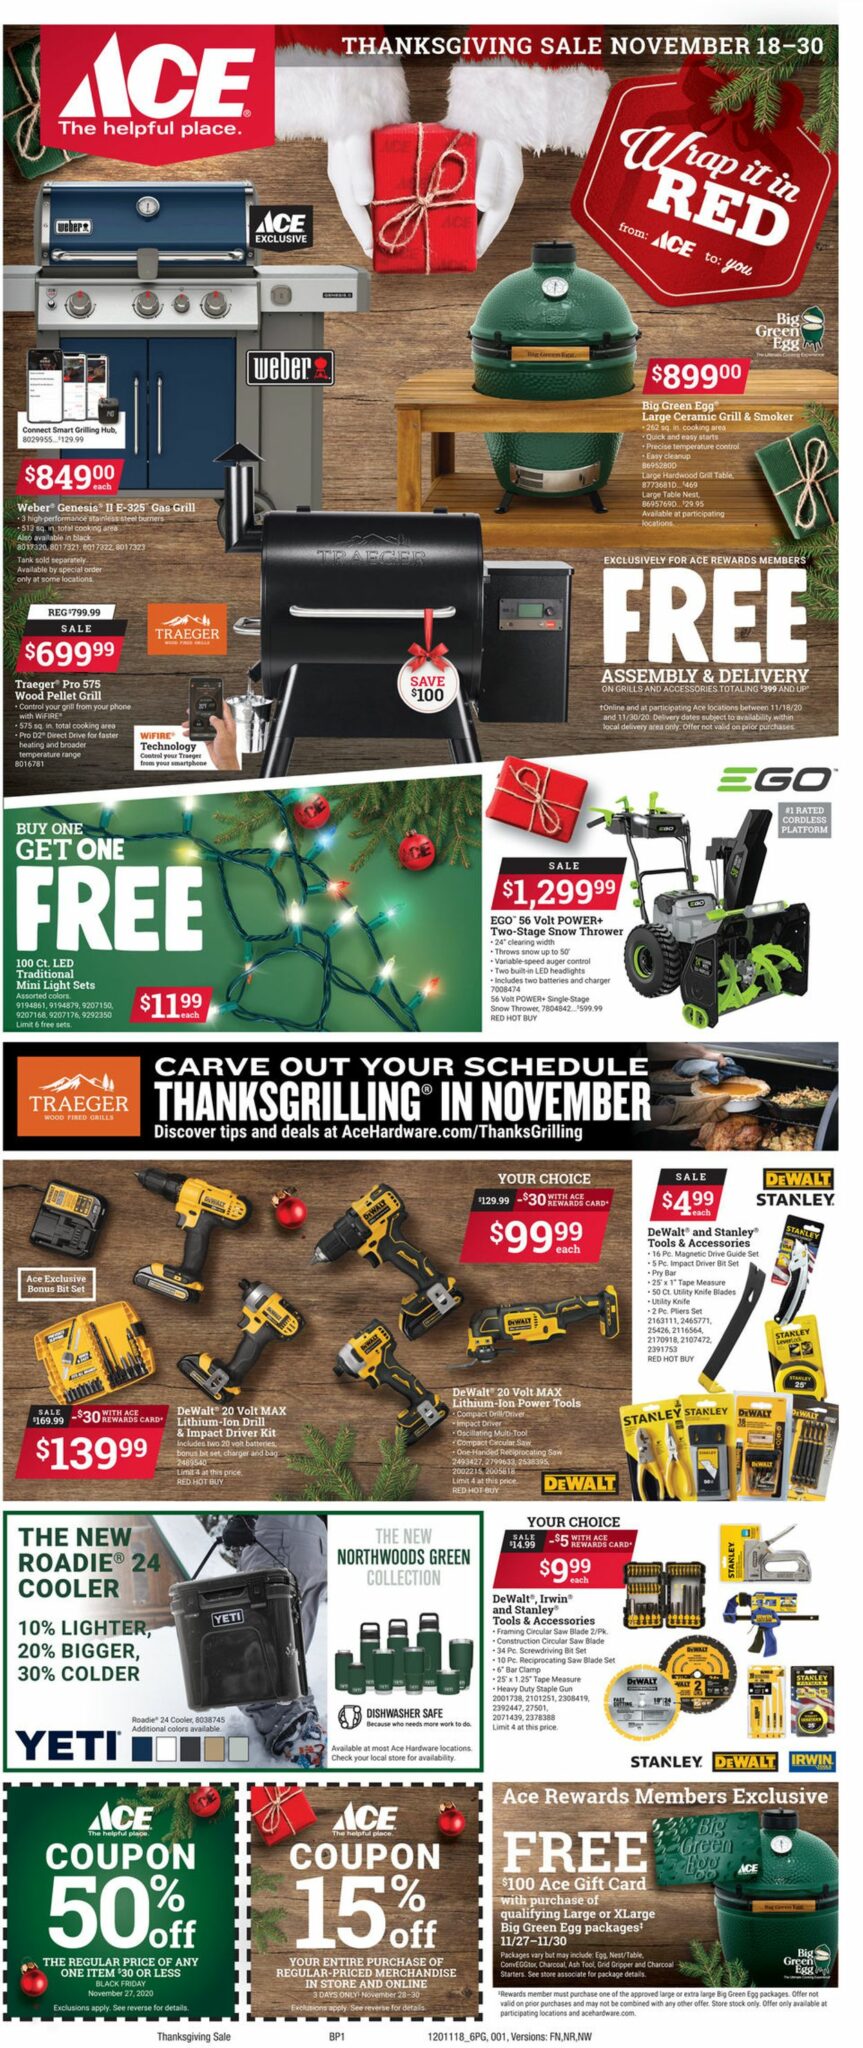 Ace Hardware Black Friday Ad 2020 - Will You Or Packard Have Deals On Black Friday